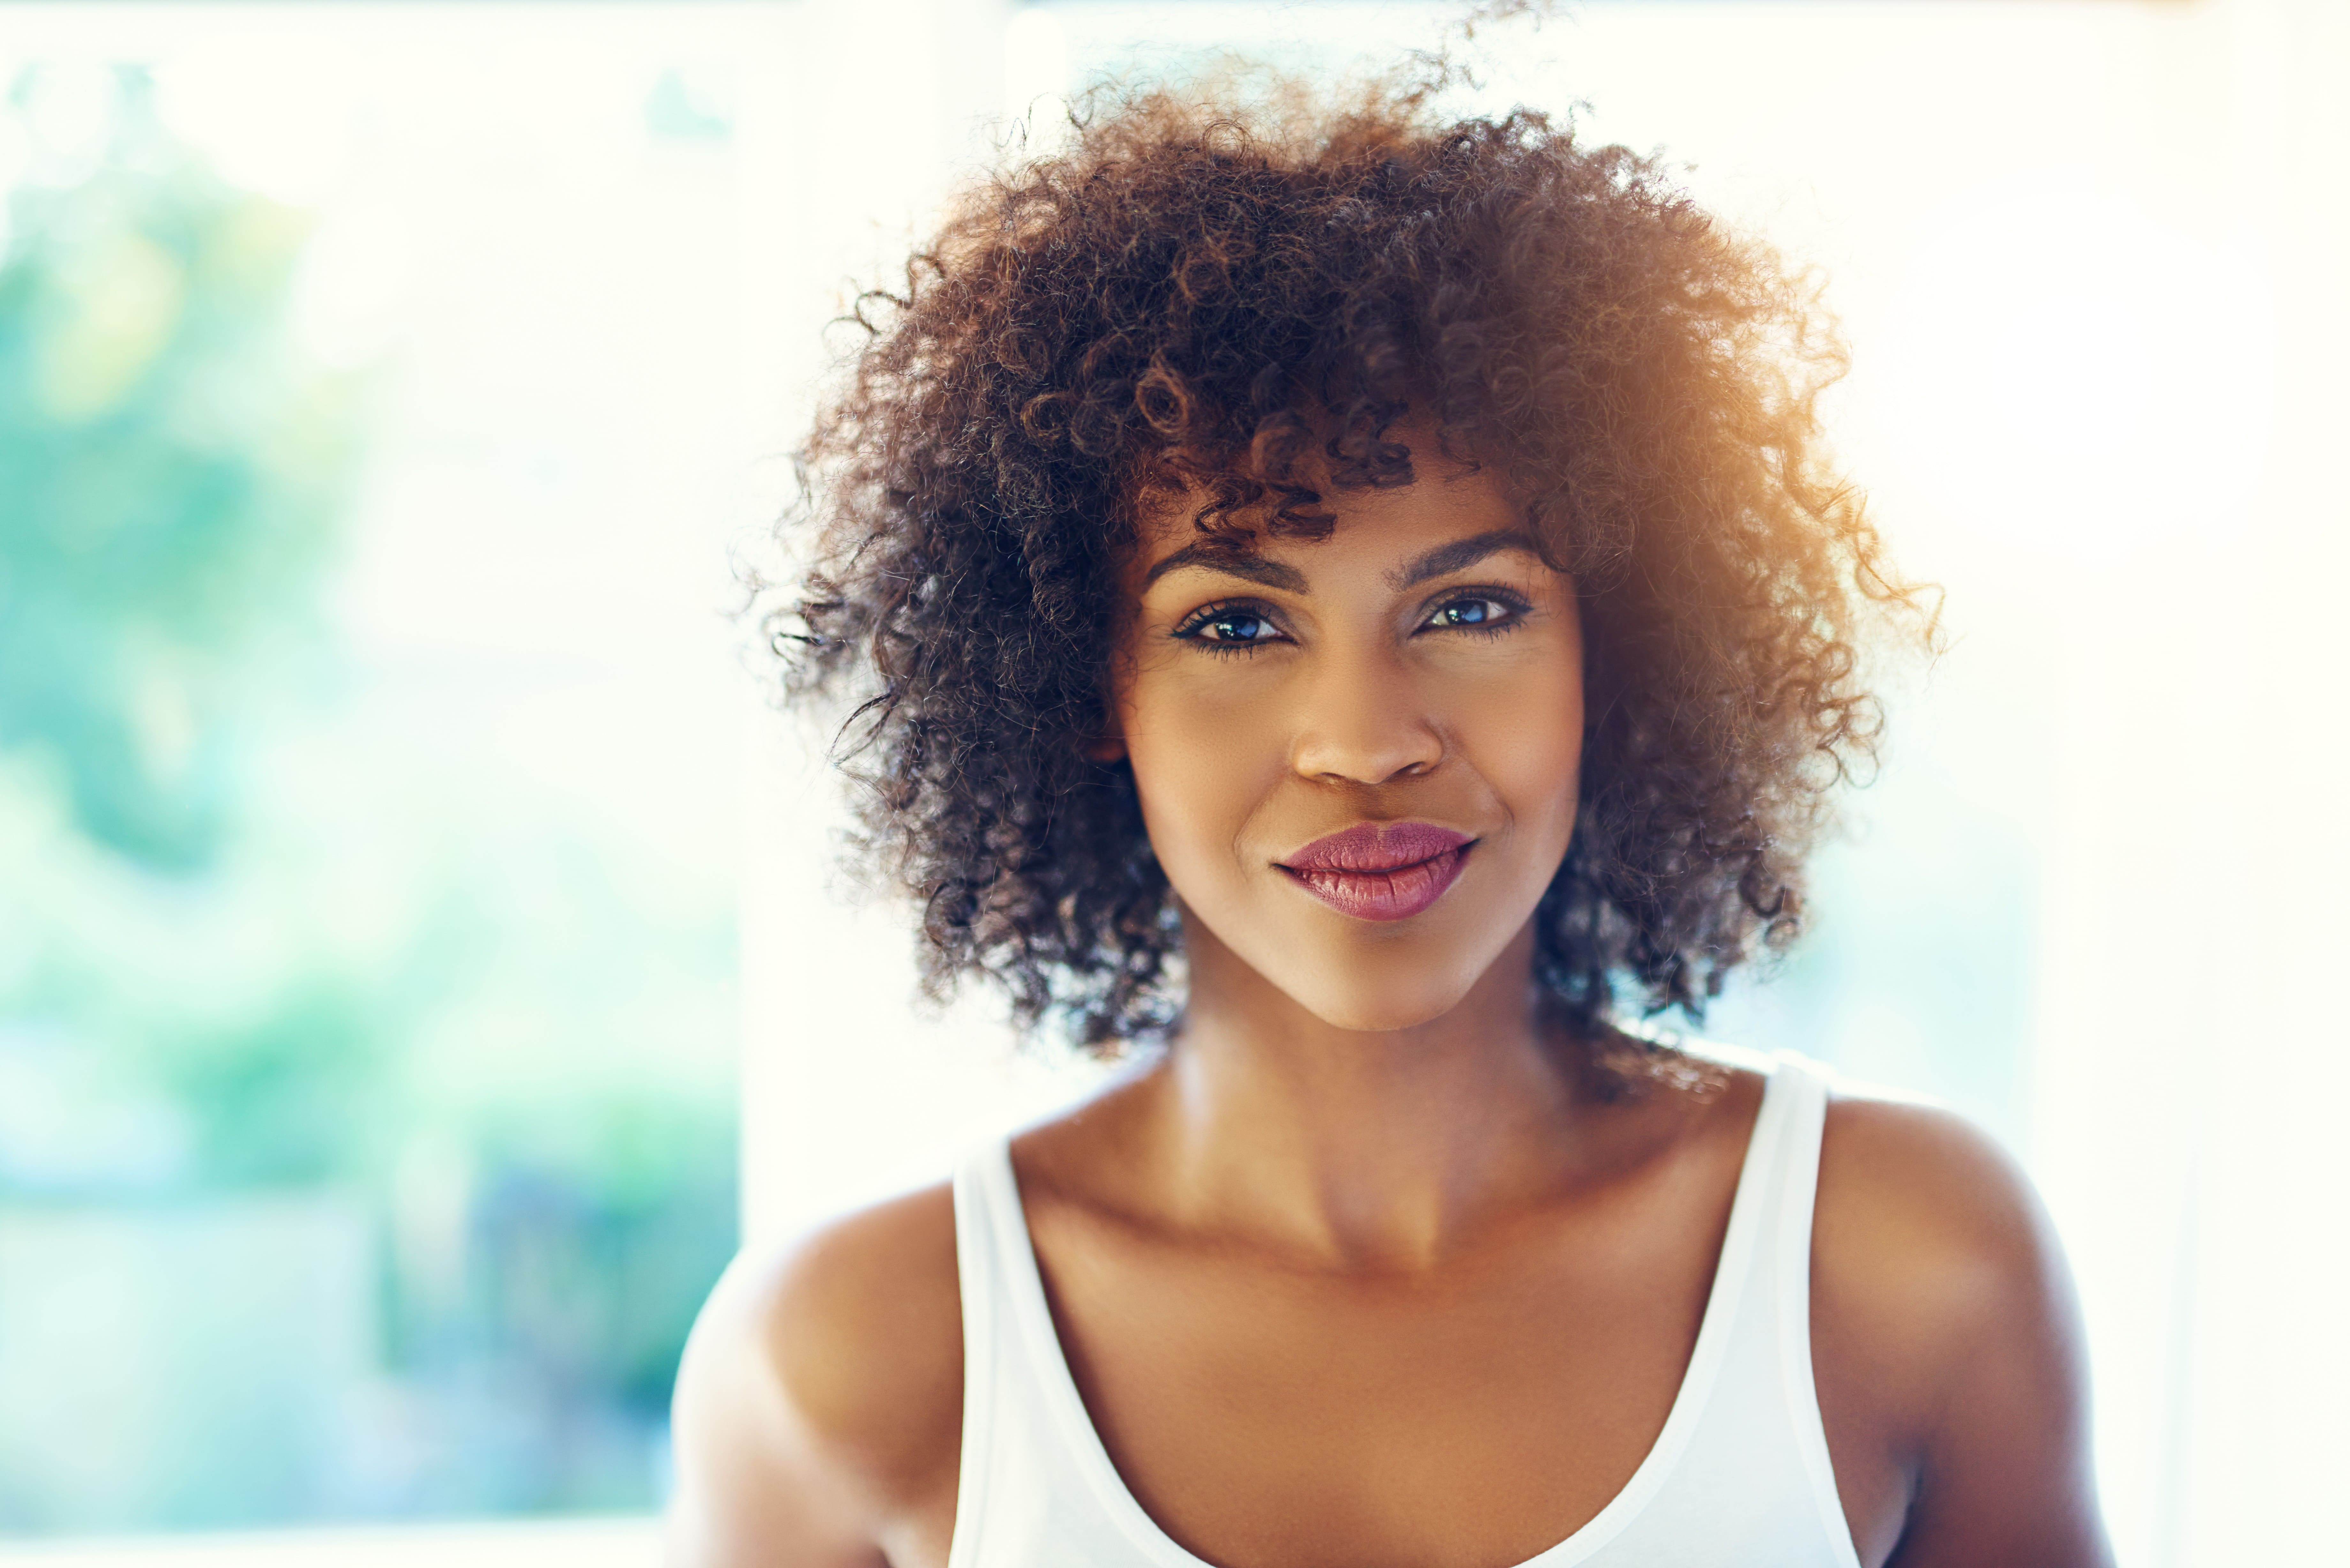 9 Habits That Will Give You High Self Esteem